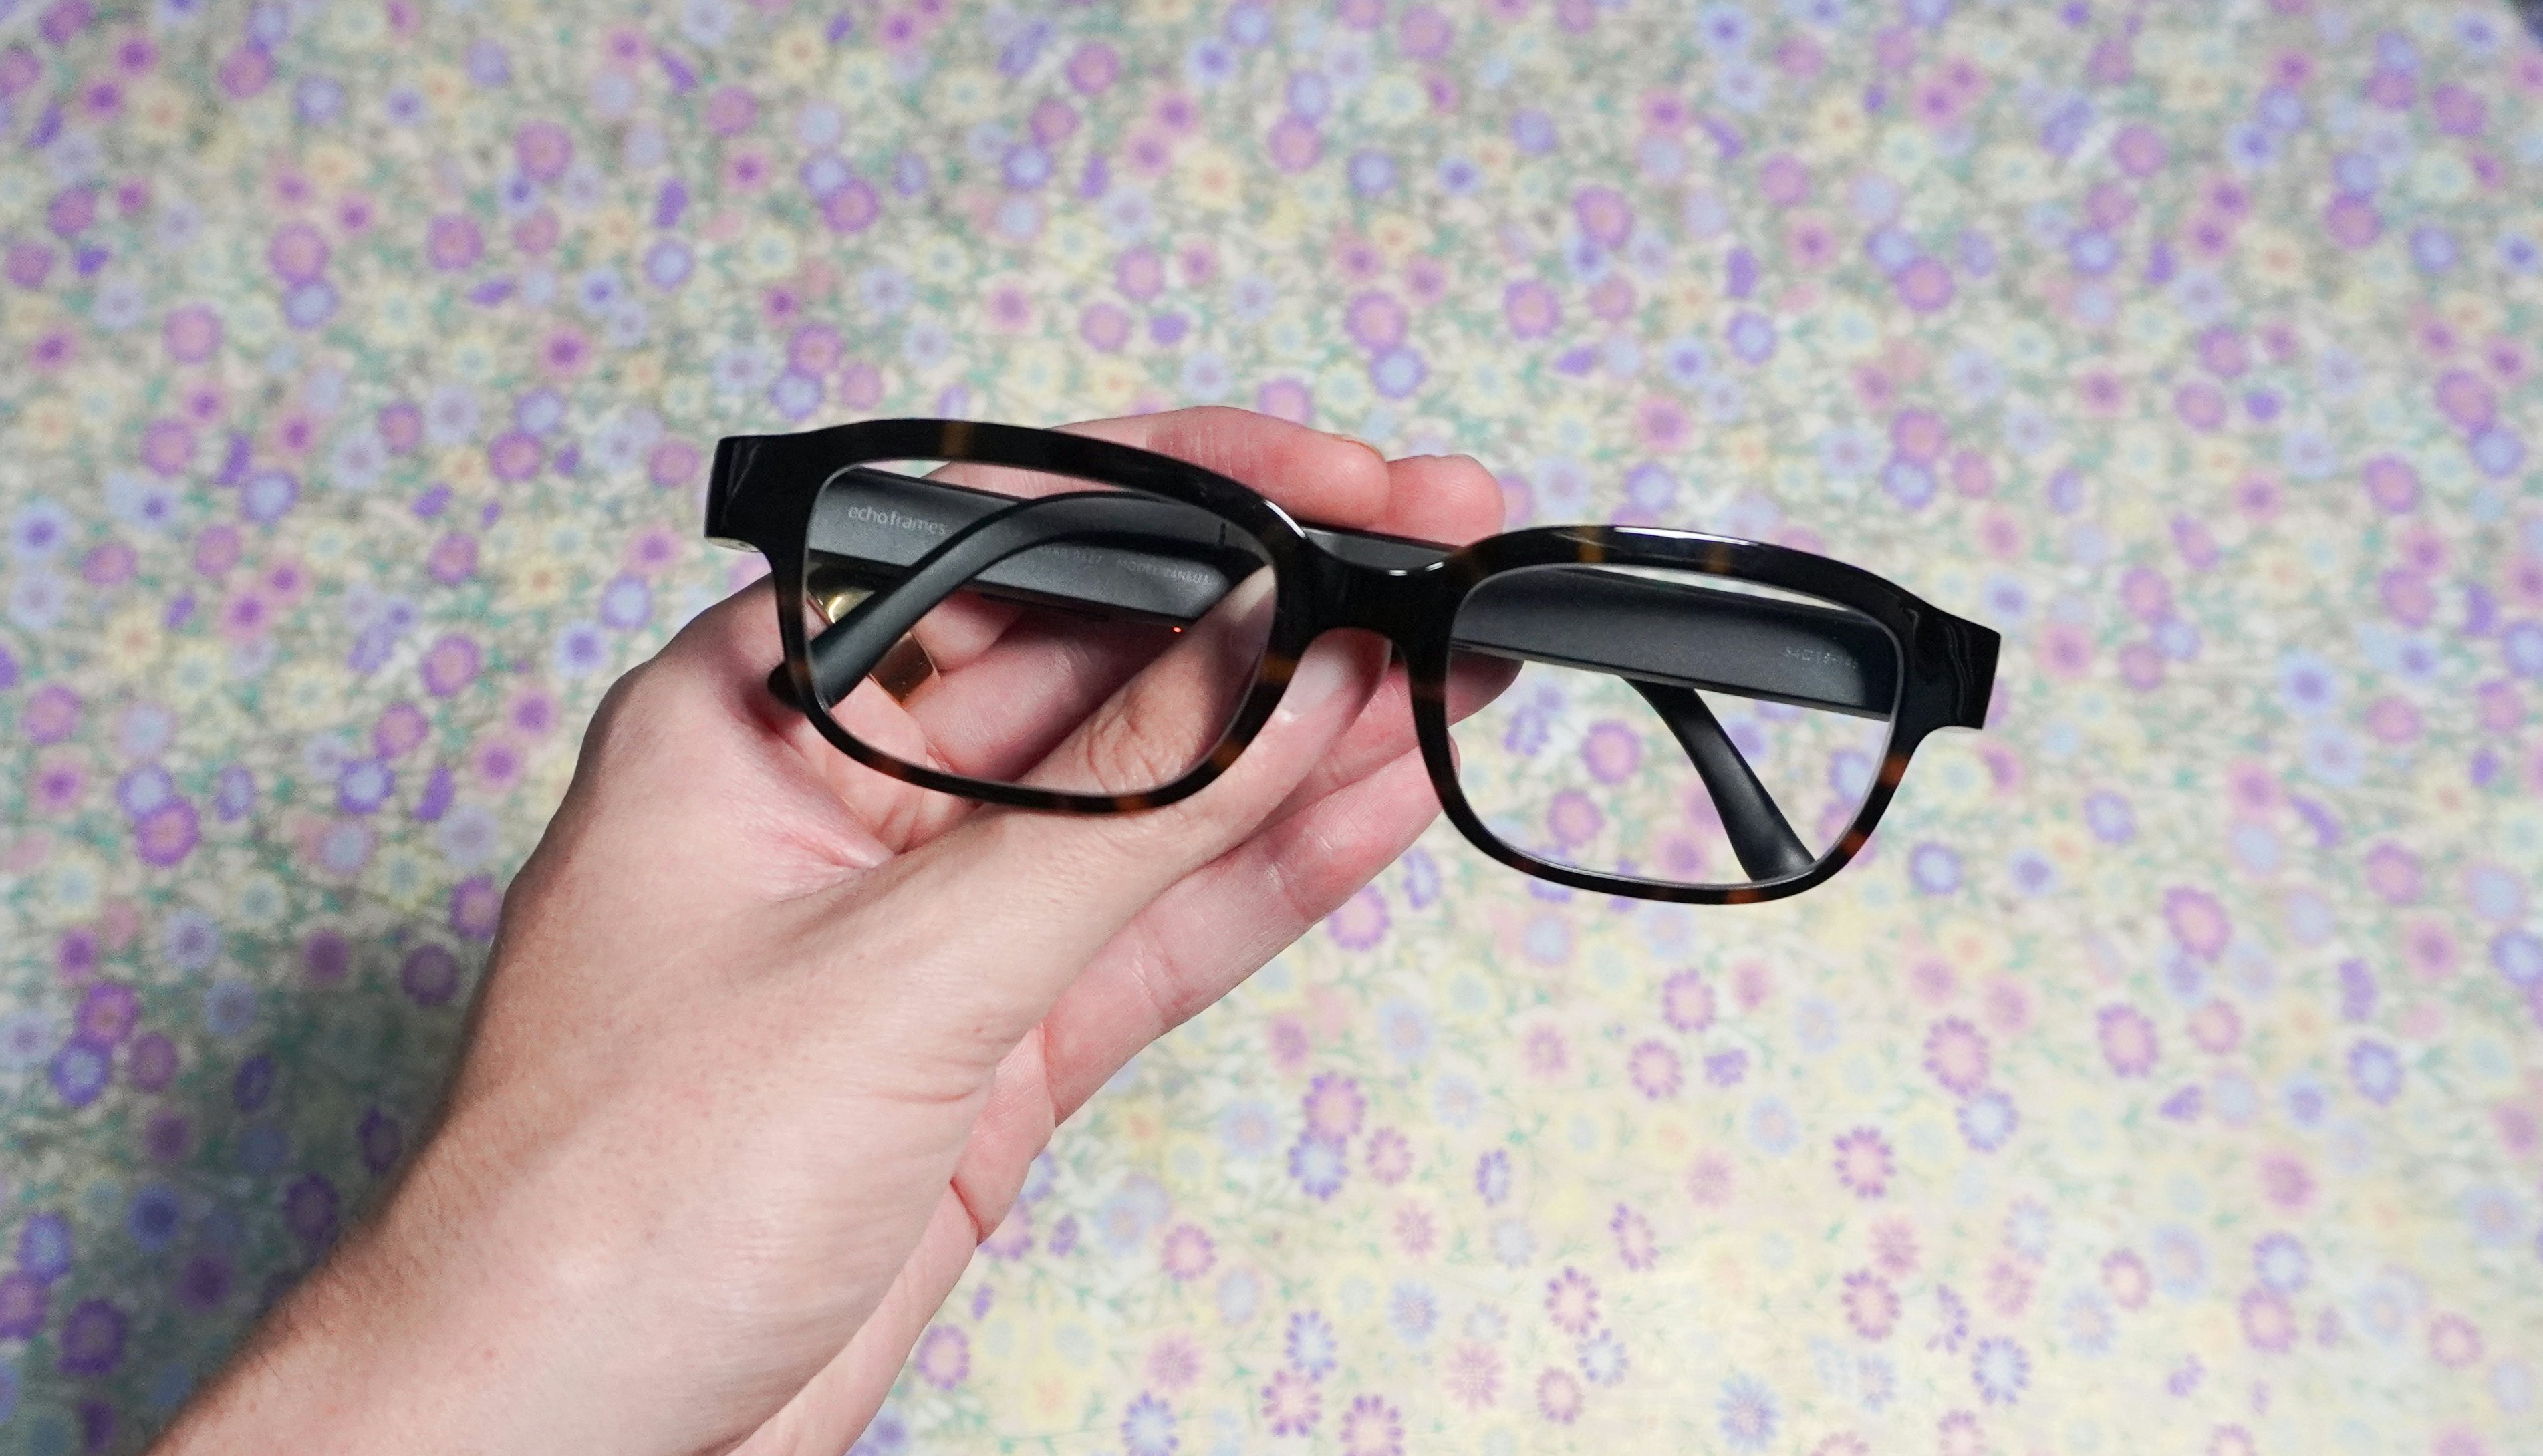 Echo Frames review: These smart glasses are better than